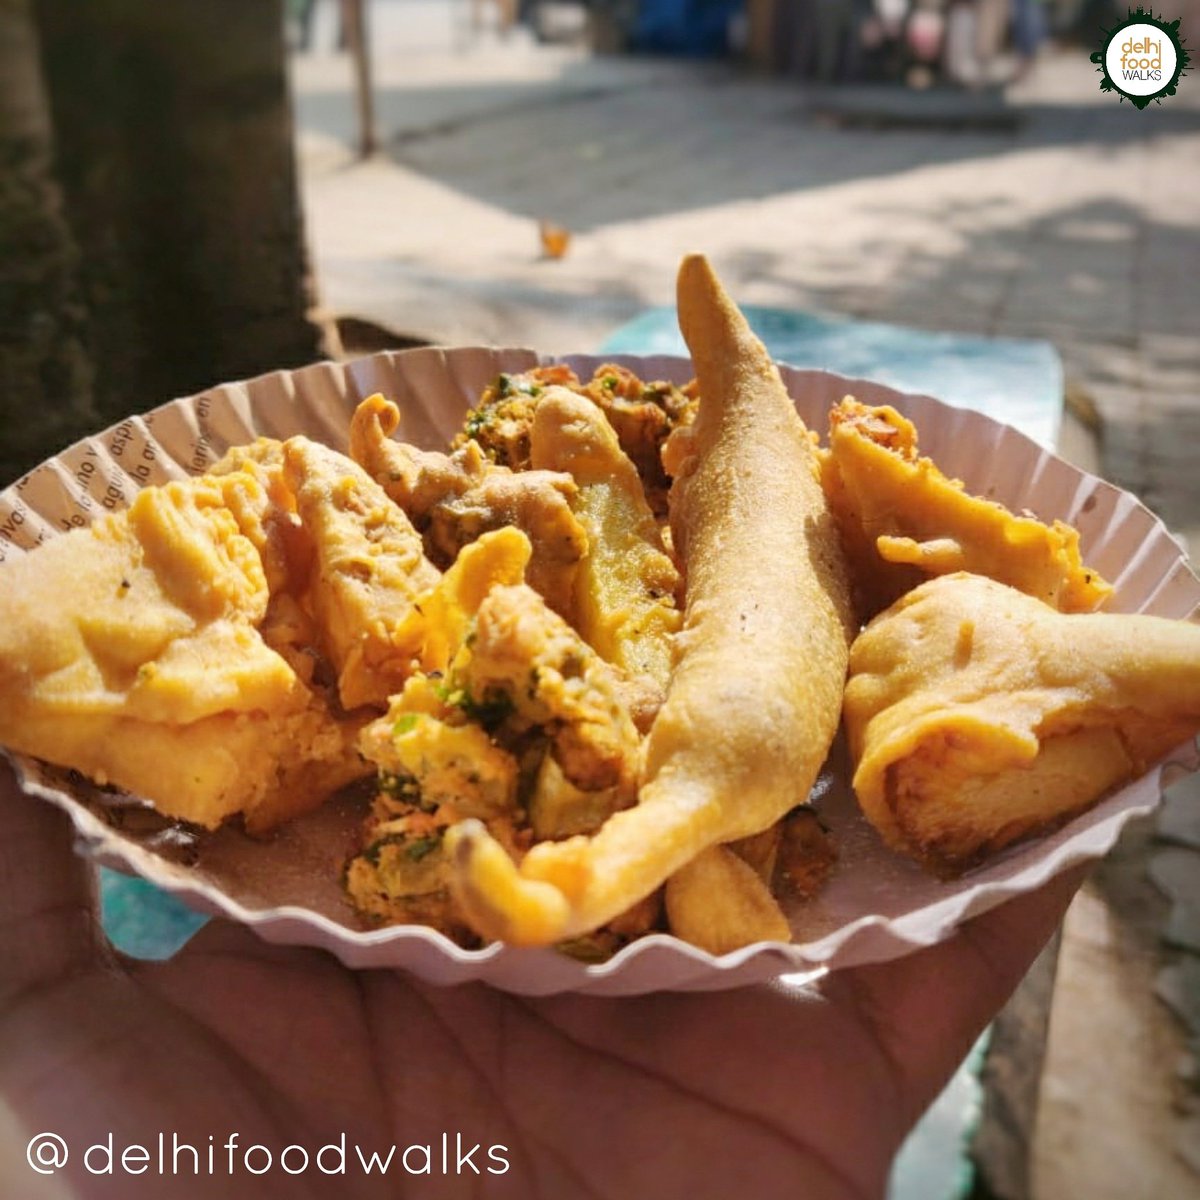 Piping hot assorted fritters combined with an indispensable cup of masala chai was the perfect way to conclude our stroll in the vicinity of Gurudwara Shri Bangla Sahib on chilly weekend morning. 

#chai #pakoda #walkwithdfw #perfectsnack #wintermorning